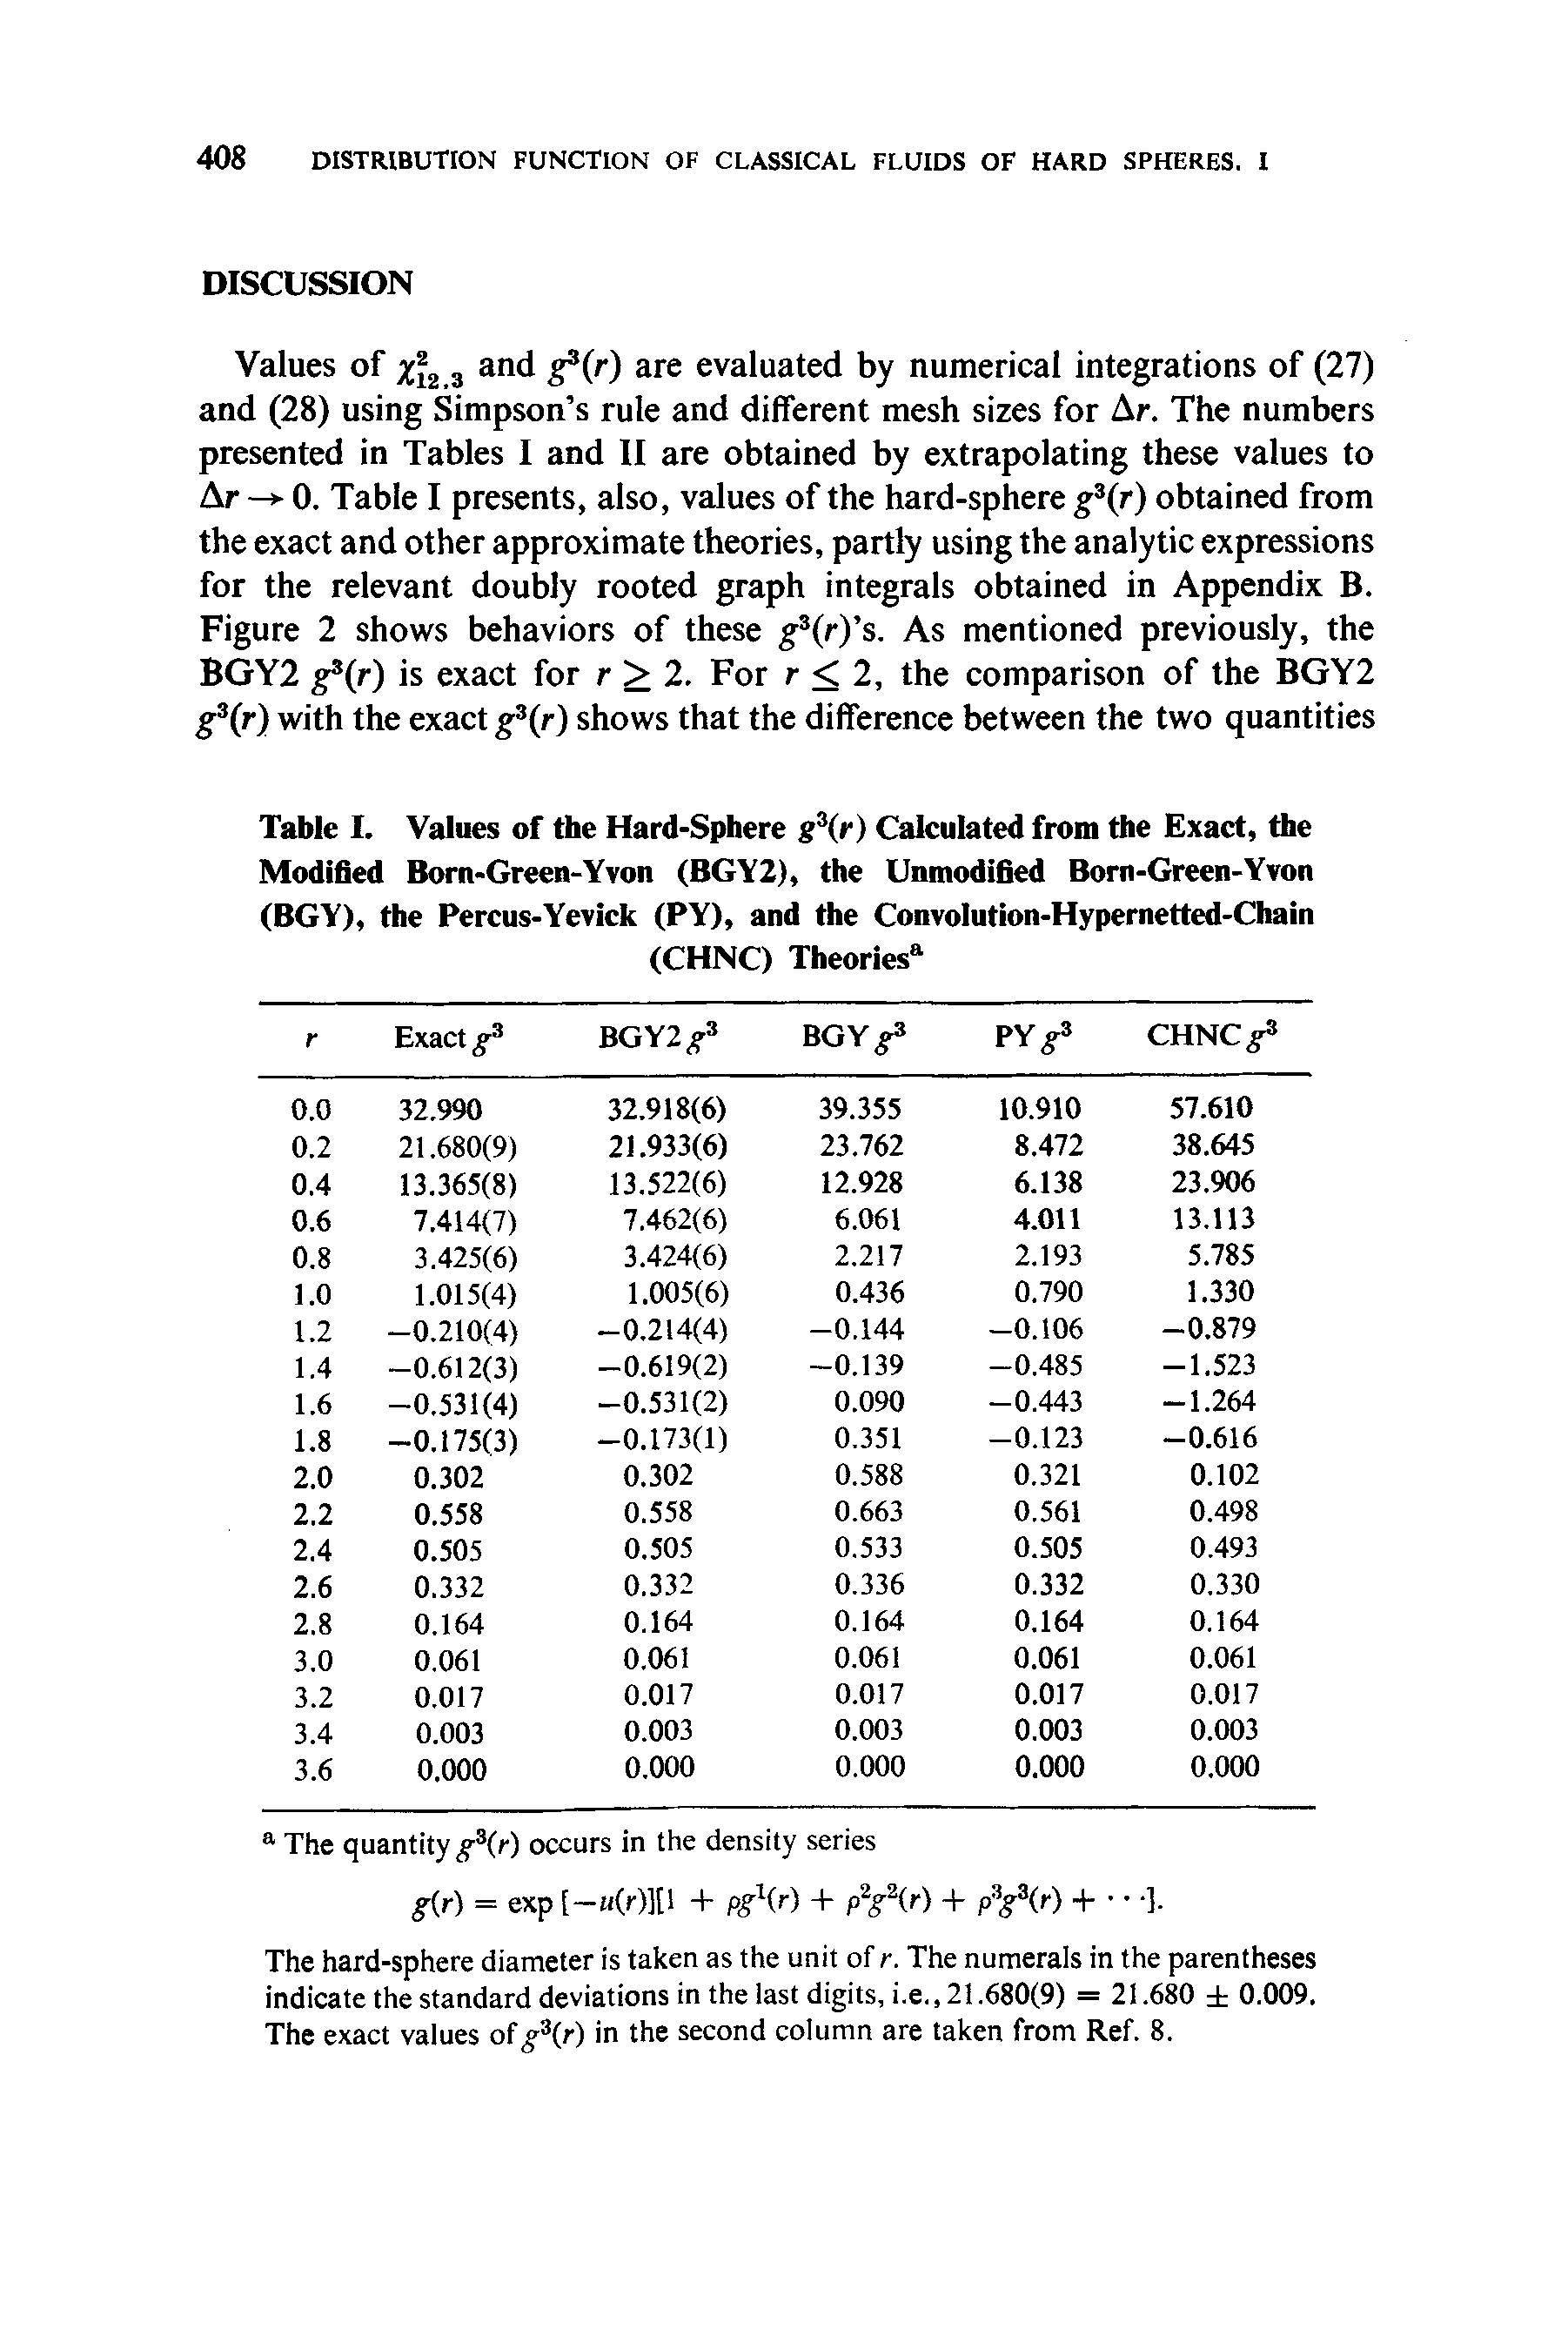 Table I. Values of the Hard-Sphere g (r) Calculated from the Exact, the Modified Born-Green-Yvon (BGY2), the Unmodified Born-Green-Yvon (BGY), the Percus-Yevick (PY), and the Convolution-Hypernetted-Chain (CHNC) Theories ...